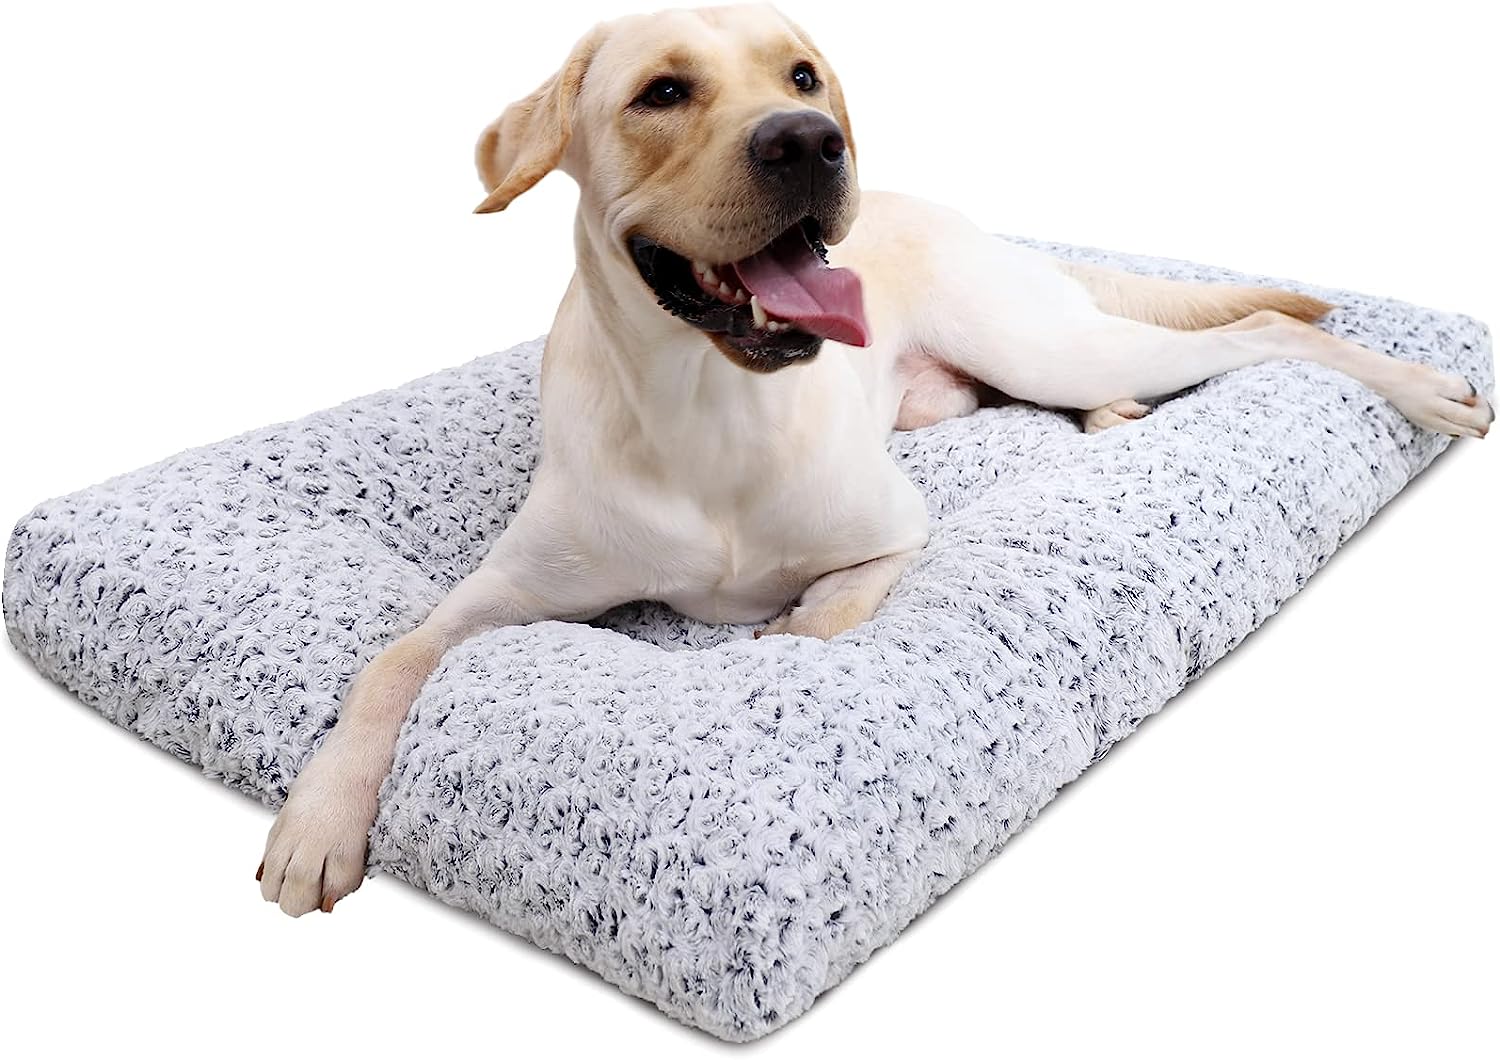 Washable Dog Bed Deluxe Plush Dog Crate Beds Fulffy Comfy Kennel Pad Anti-Slip Pet Sleeping Mat for Large, Jumbo, Medium, Small Dogs Breeds, Review